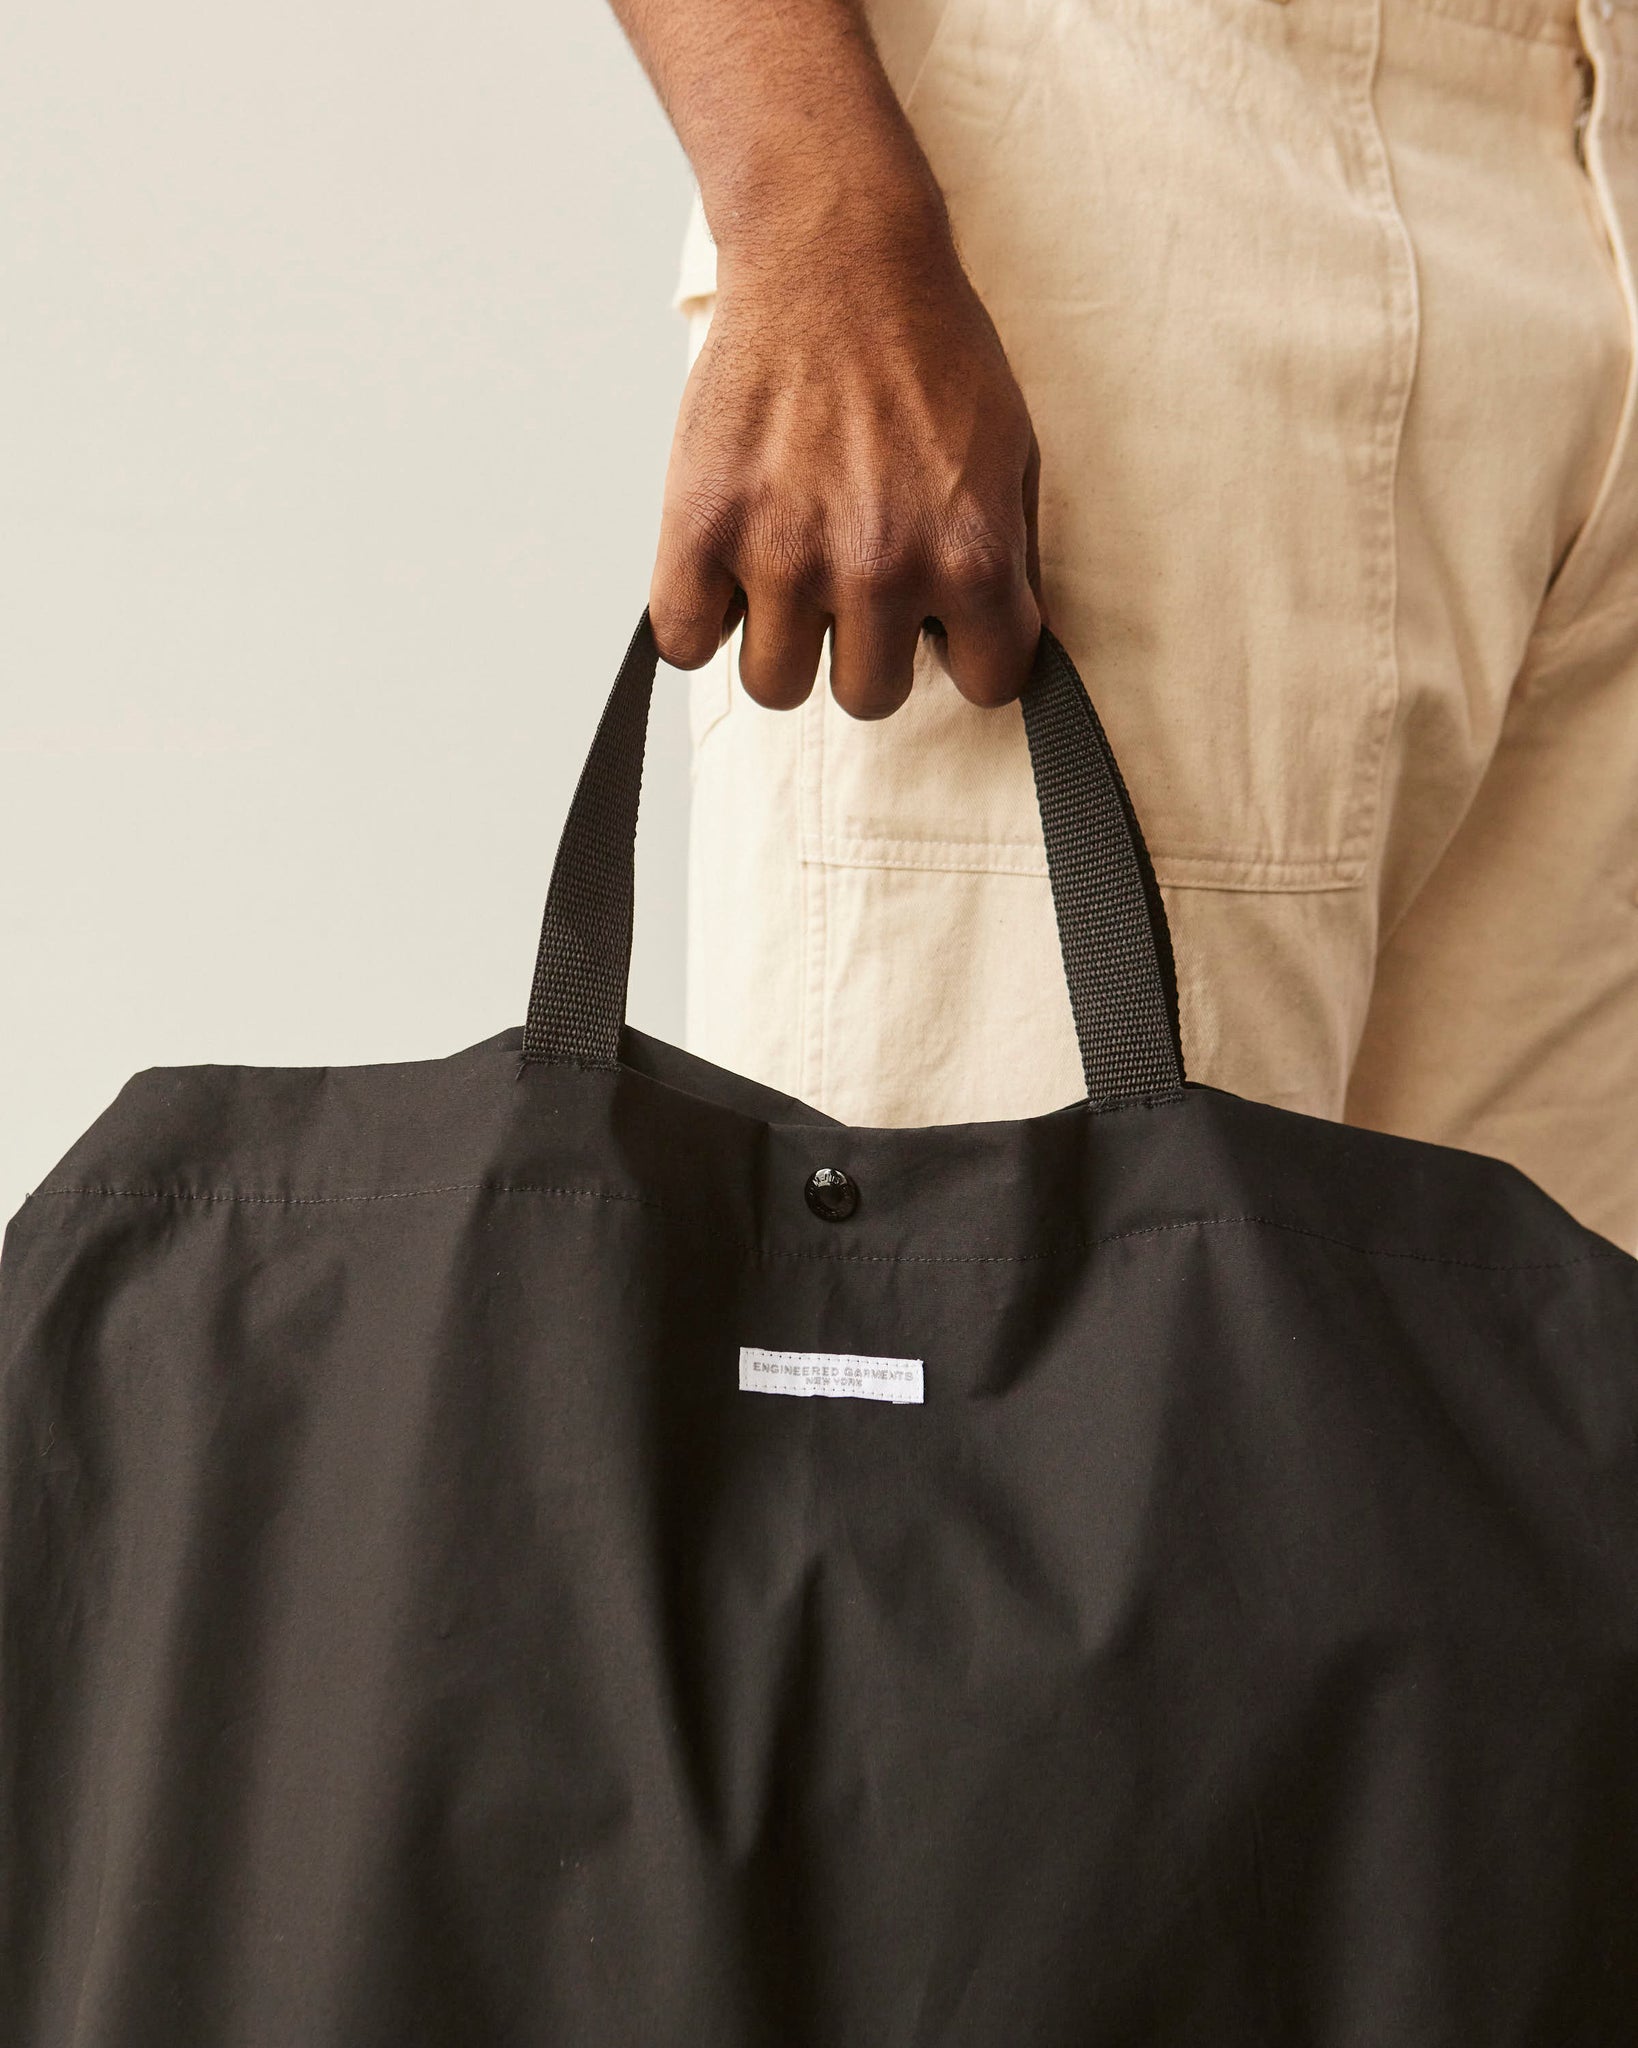 Utility Tote - Landscape - Engineered Garments Special Edition